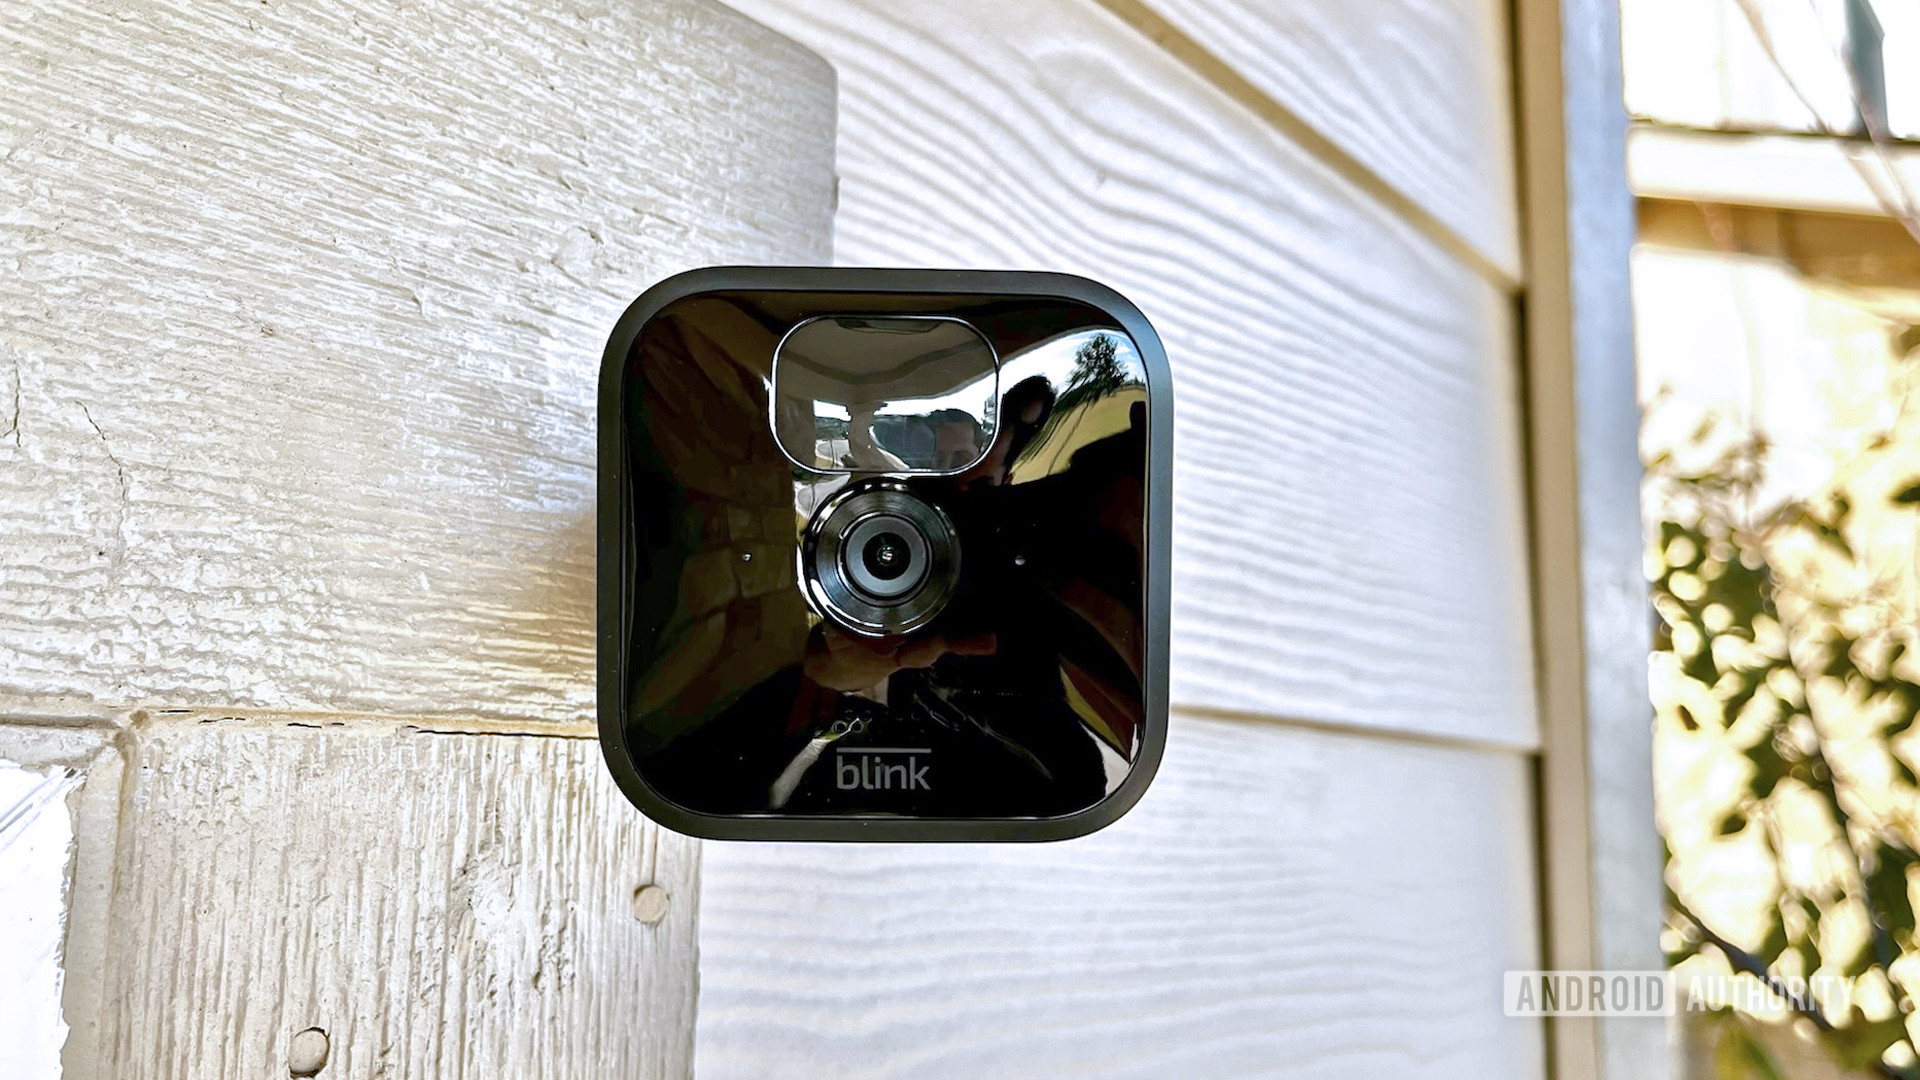 A head-on shot of the Blink Outdoor camera